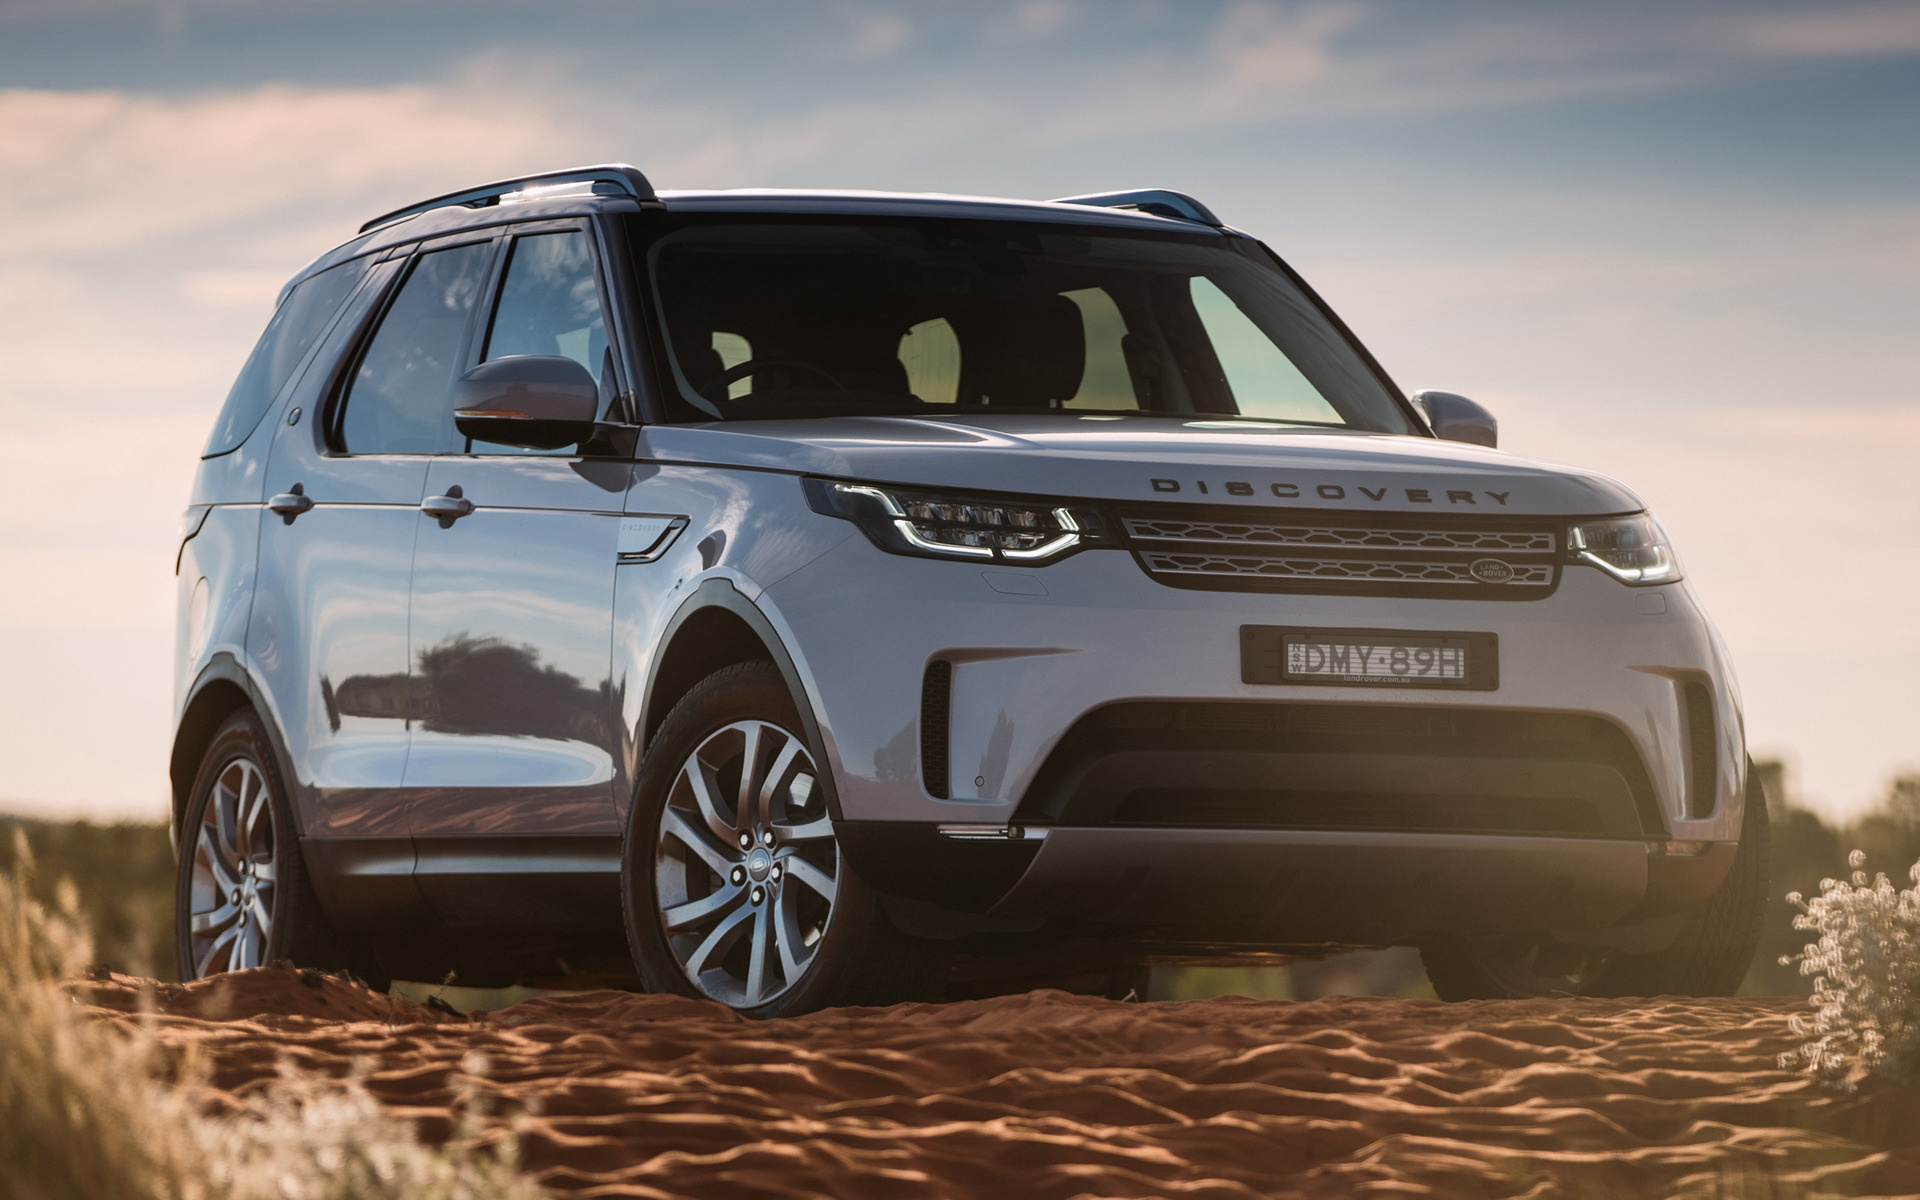 Дискавери 720. Land Rover Discovery 2022. Ленд Ровер Дискавери 2023. Land Rover Discovery Sport 2022. Ровер Дискавери 2022.